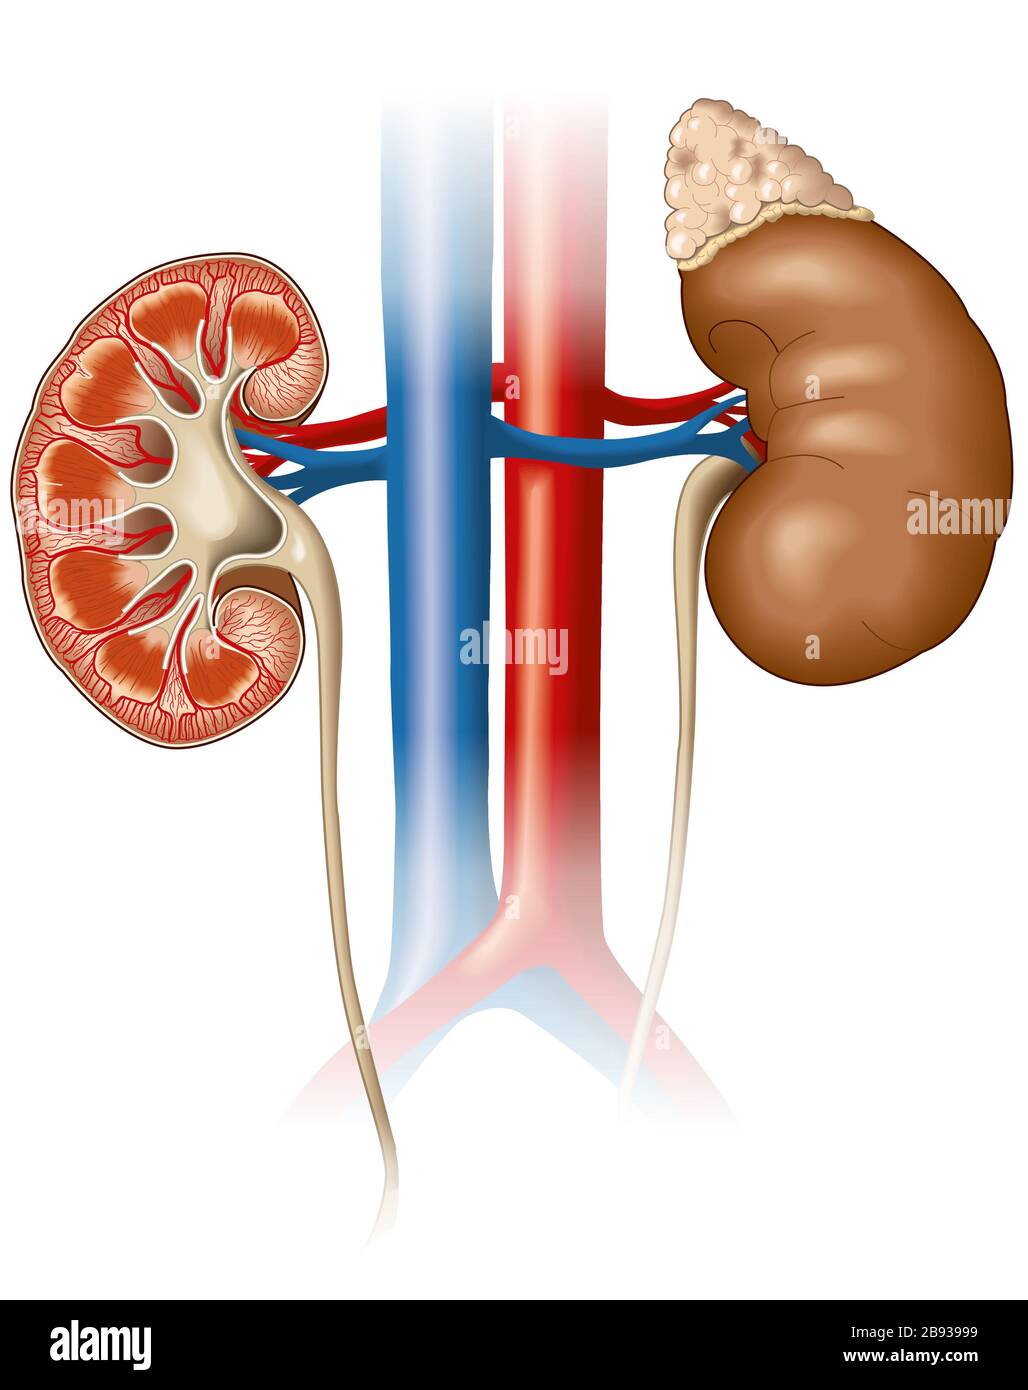 Medically illustration showing cross-section of a kidney with inferior vena cava and descending aorta Stock Photo